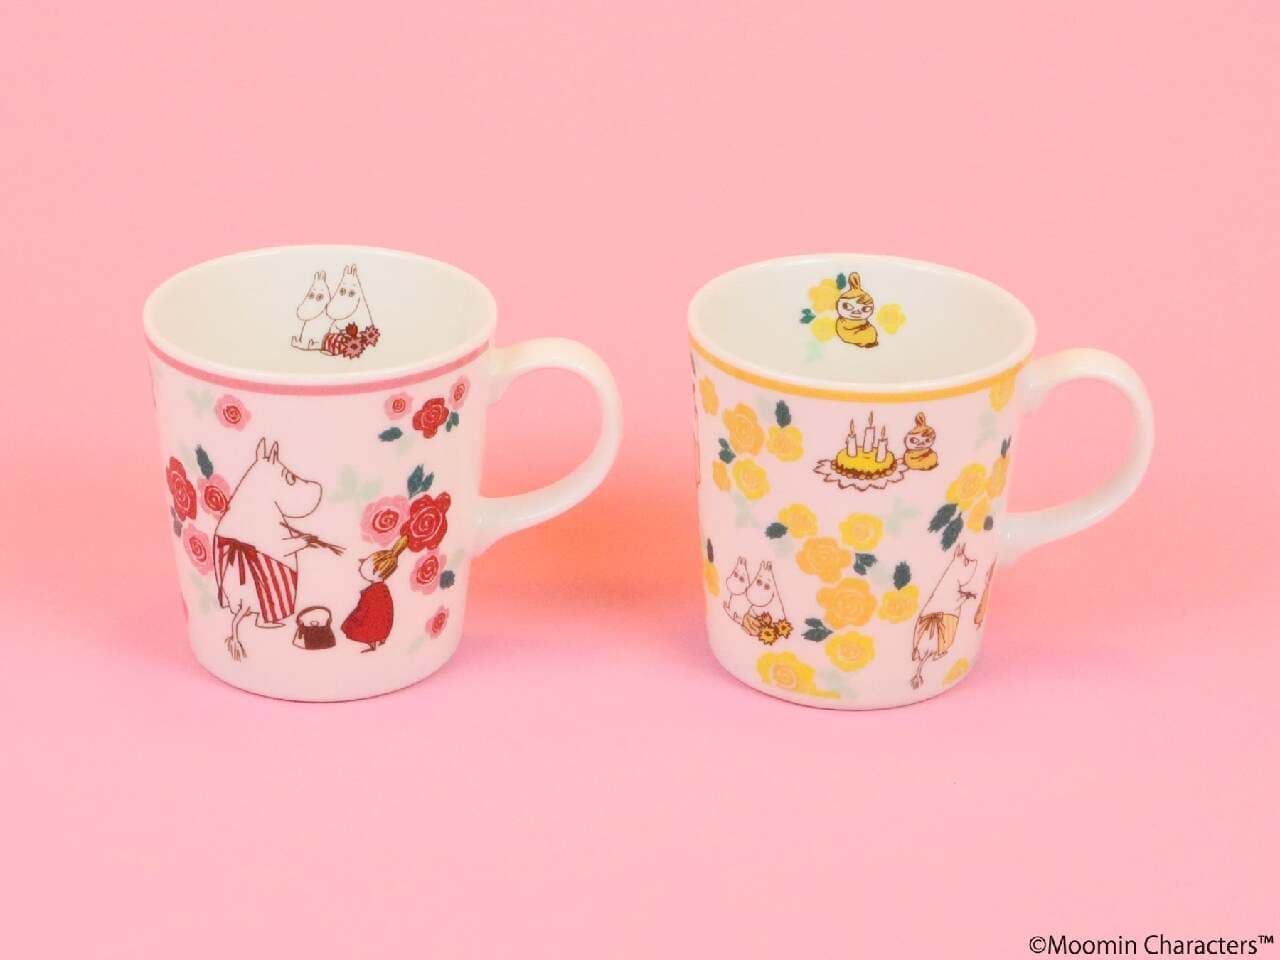 Lights and Brands' "All About Moominmama" series for Mother's Day to launch in Japan in April 2024, featuring more than 150 heartwarming gift items Image 2